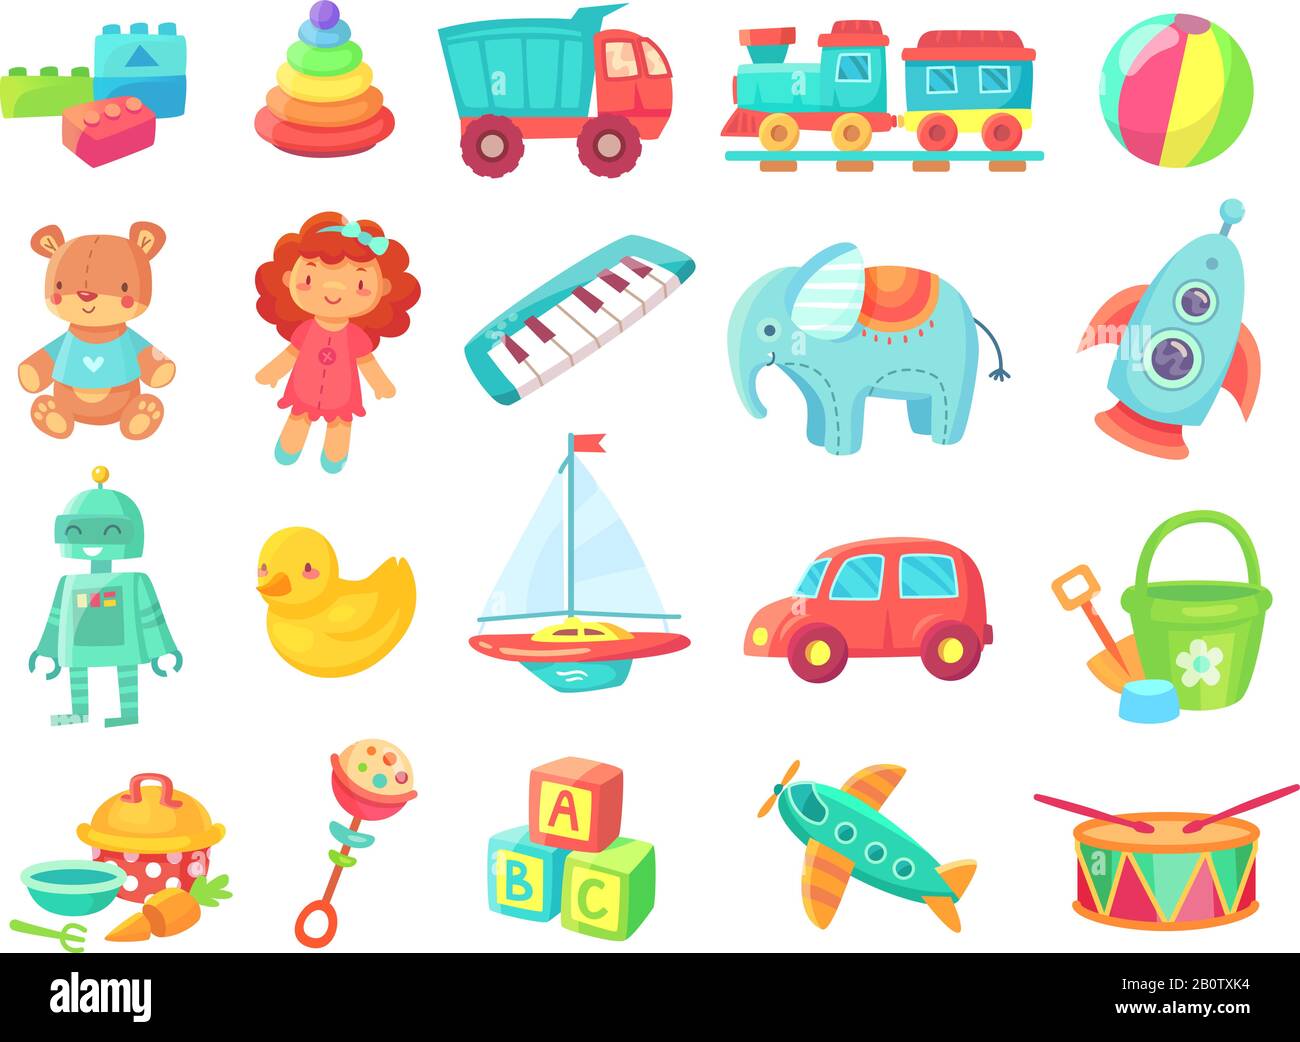 Kids cartoon toys. Baby doll, train on railway, ball, cars, boat, boys and girls fun isolated plastic toy vector collection Stock Vector